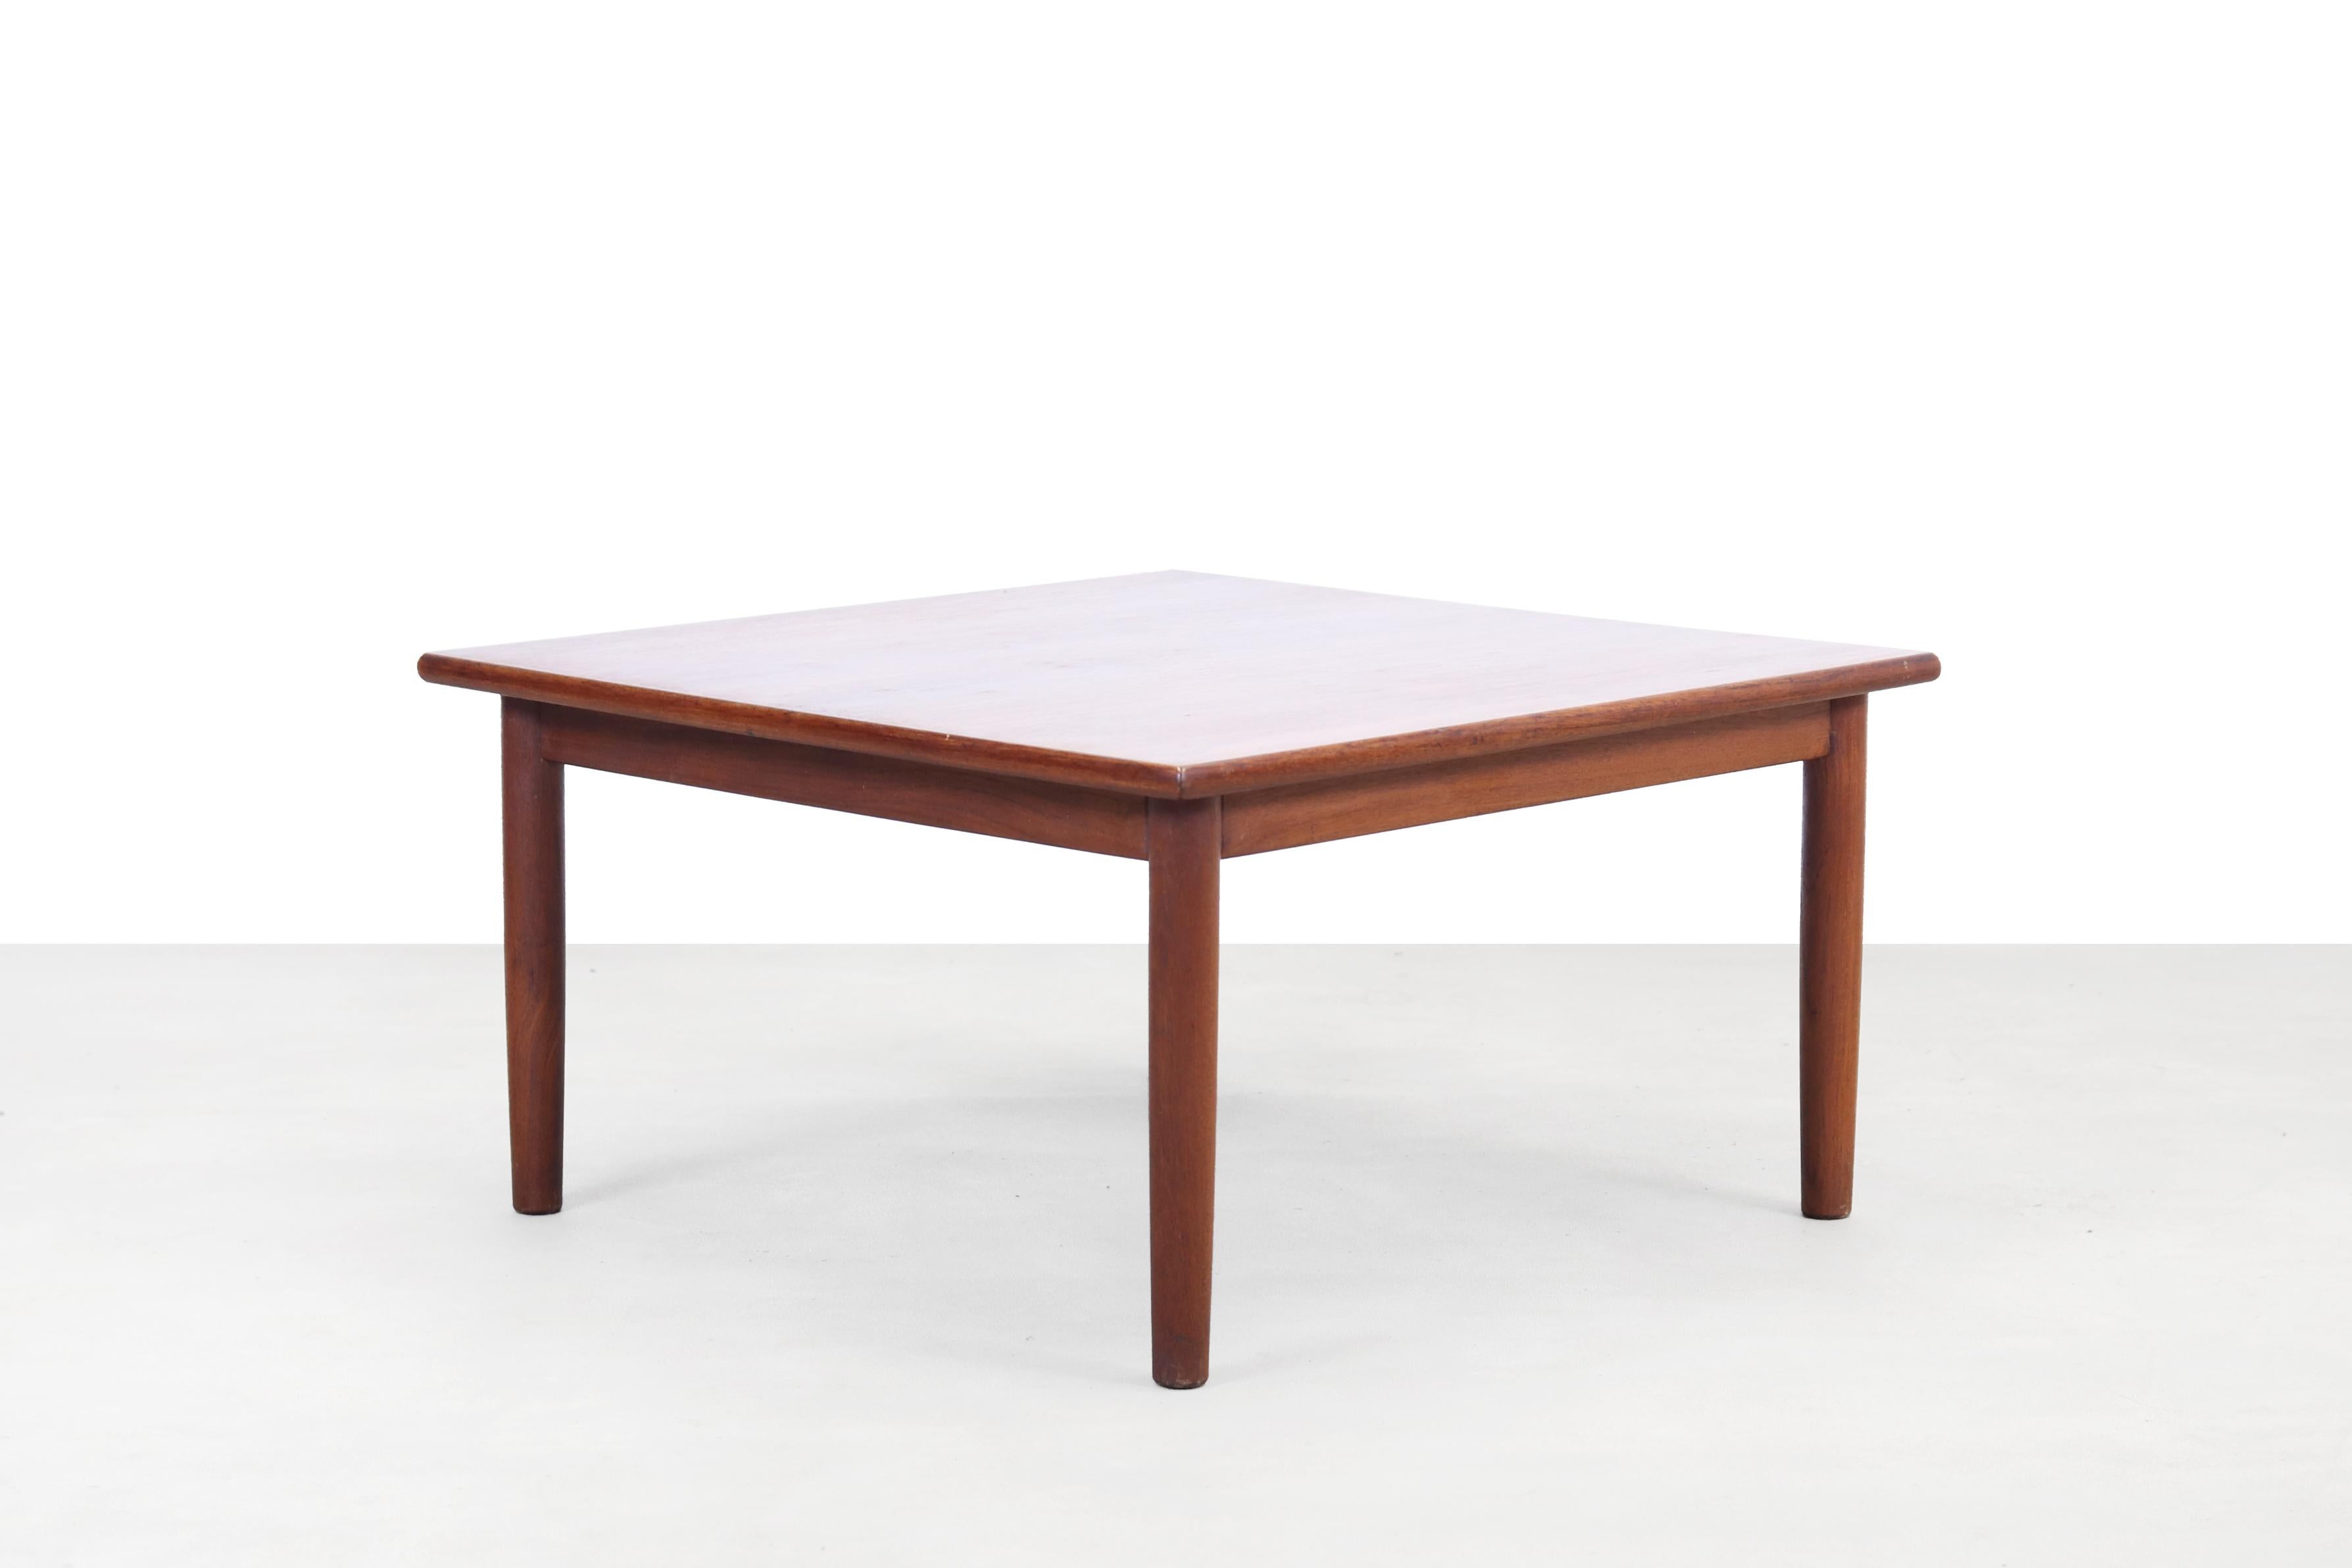 Square coffee table made of solid wooden legs with a teak veneered top. This square table is the perfect solution for a modern corner sofa. Or place it in the corner of two straight sofas to create a corner sofa.